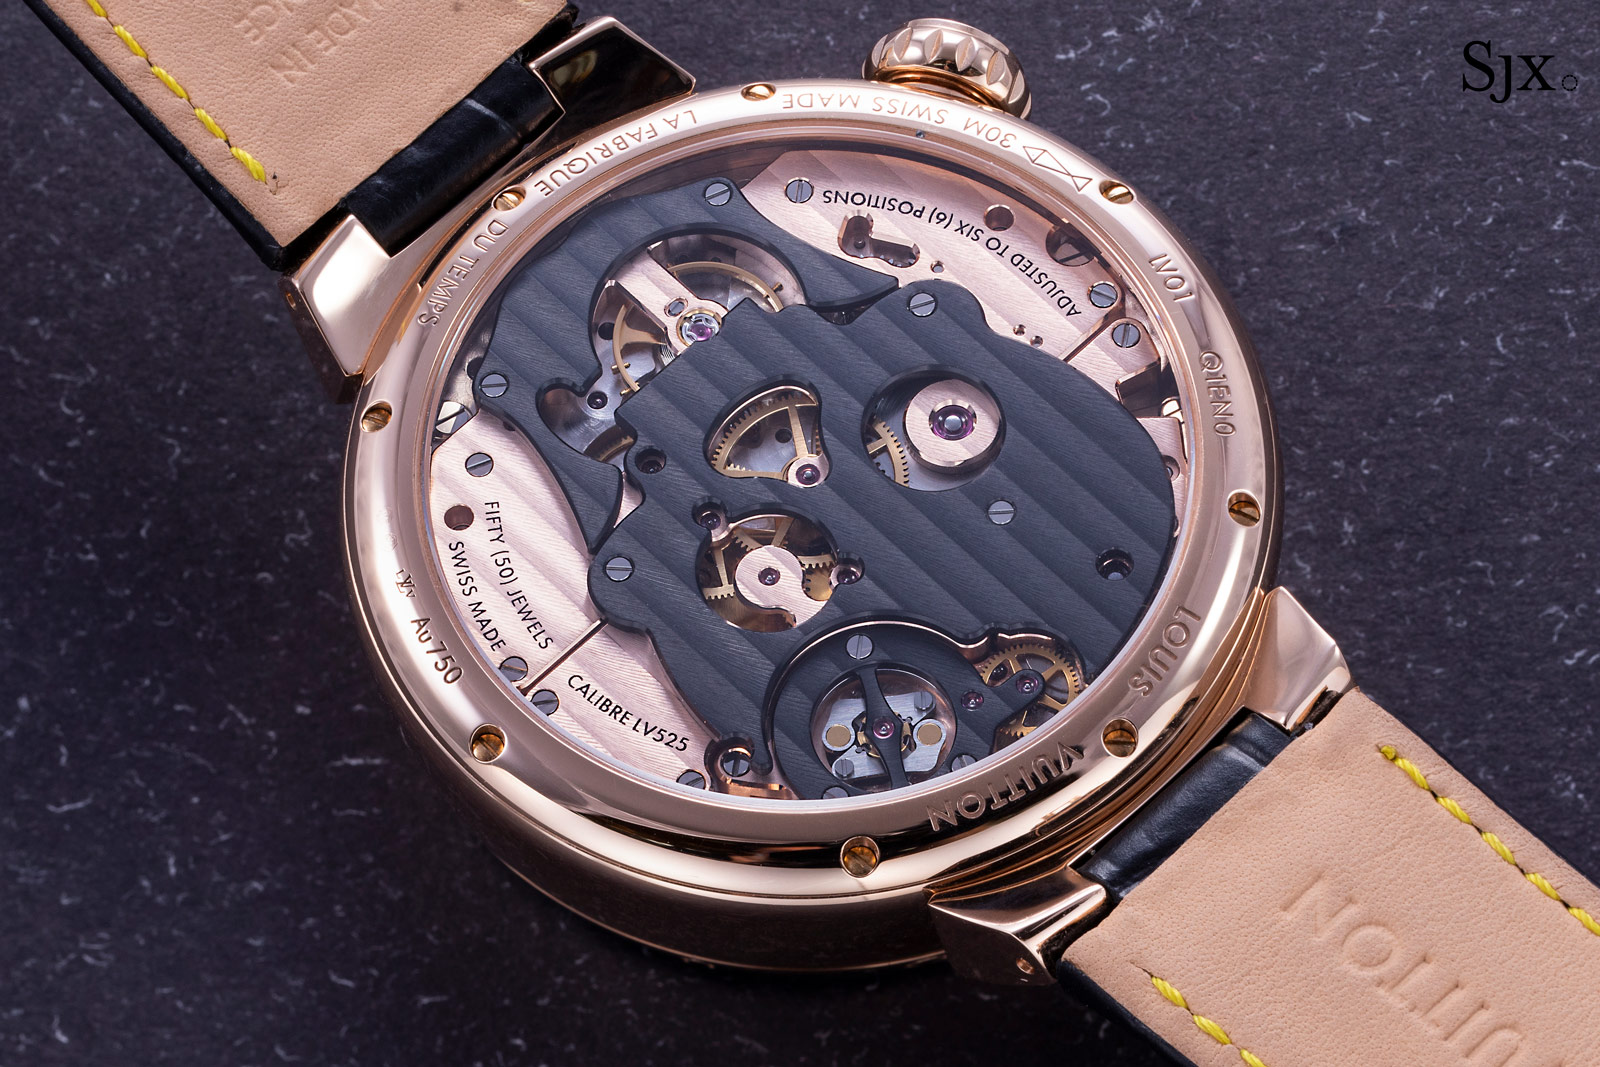 Louis Vuitton Tambour Carpe Diem: A Striking Reminder To Make Every  Precious Moment Count - Quill & Pad